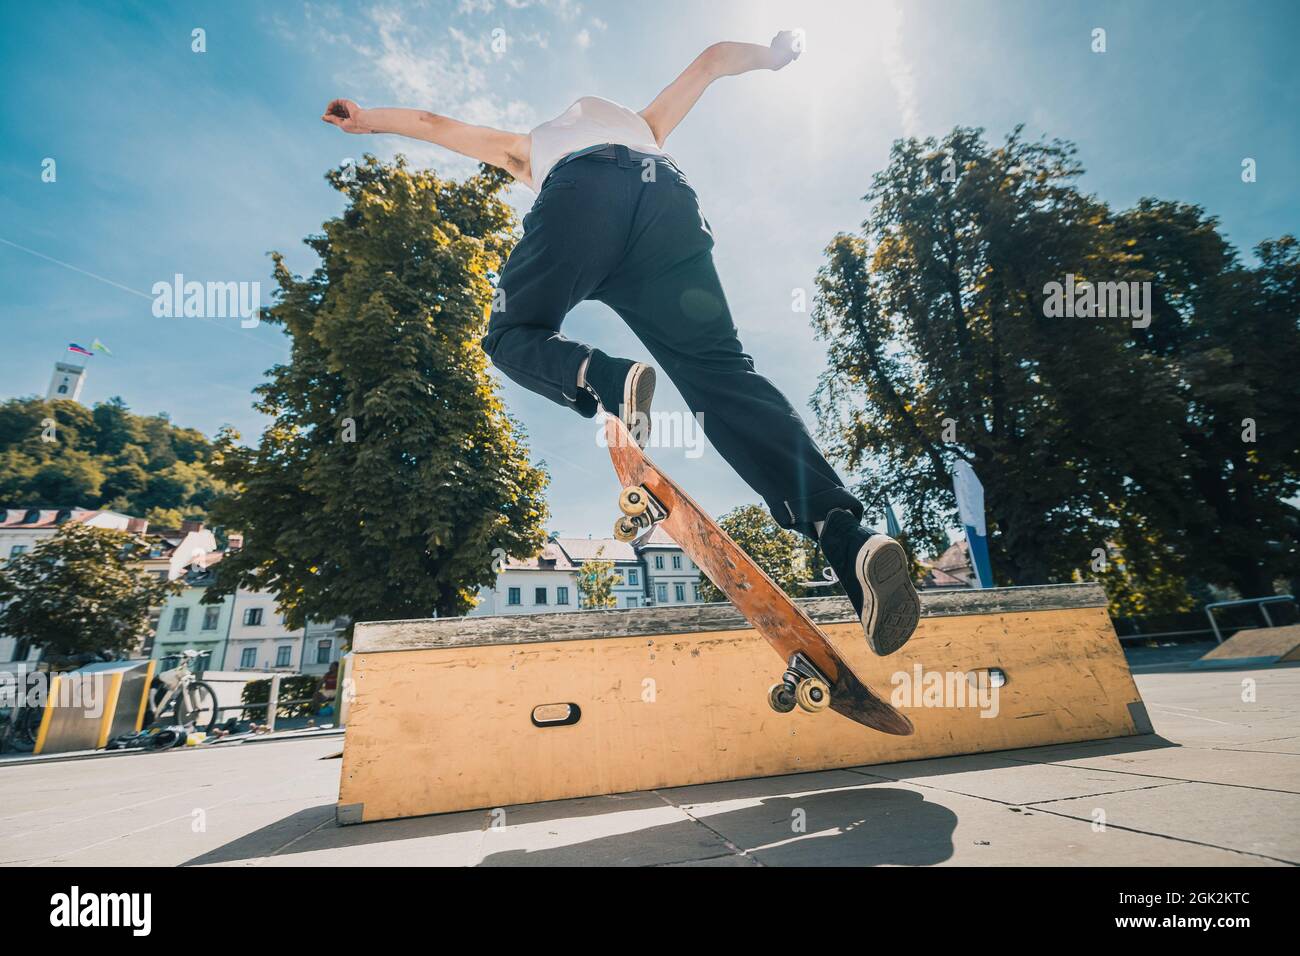 Anonymous skateboarder performing a trick on a wooden box on a sunny day in the city center. Young skater jumping. Stock Photo